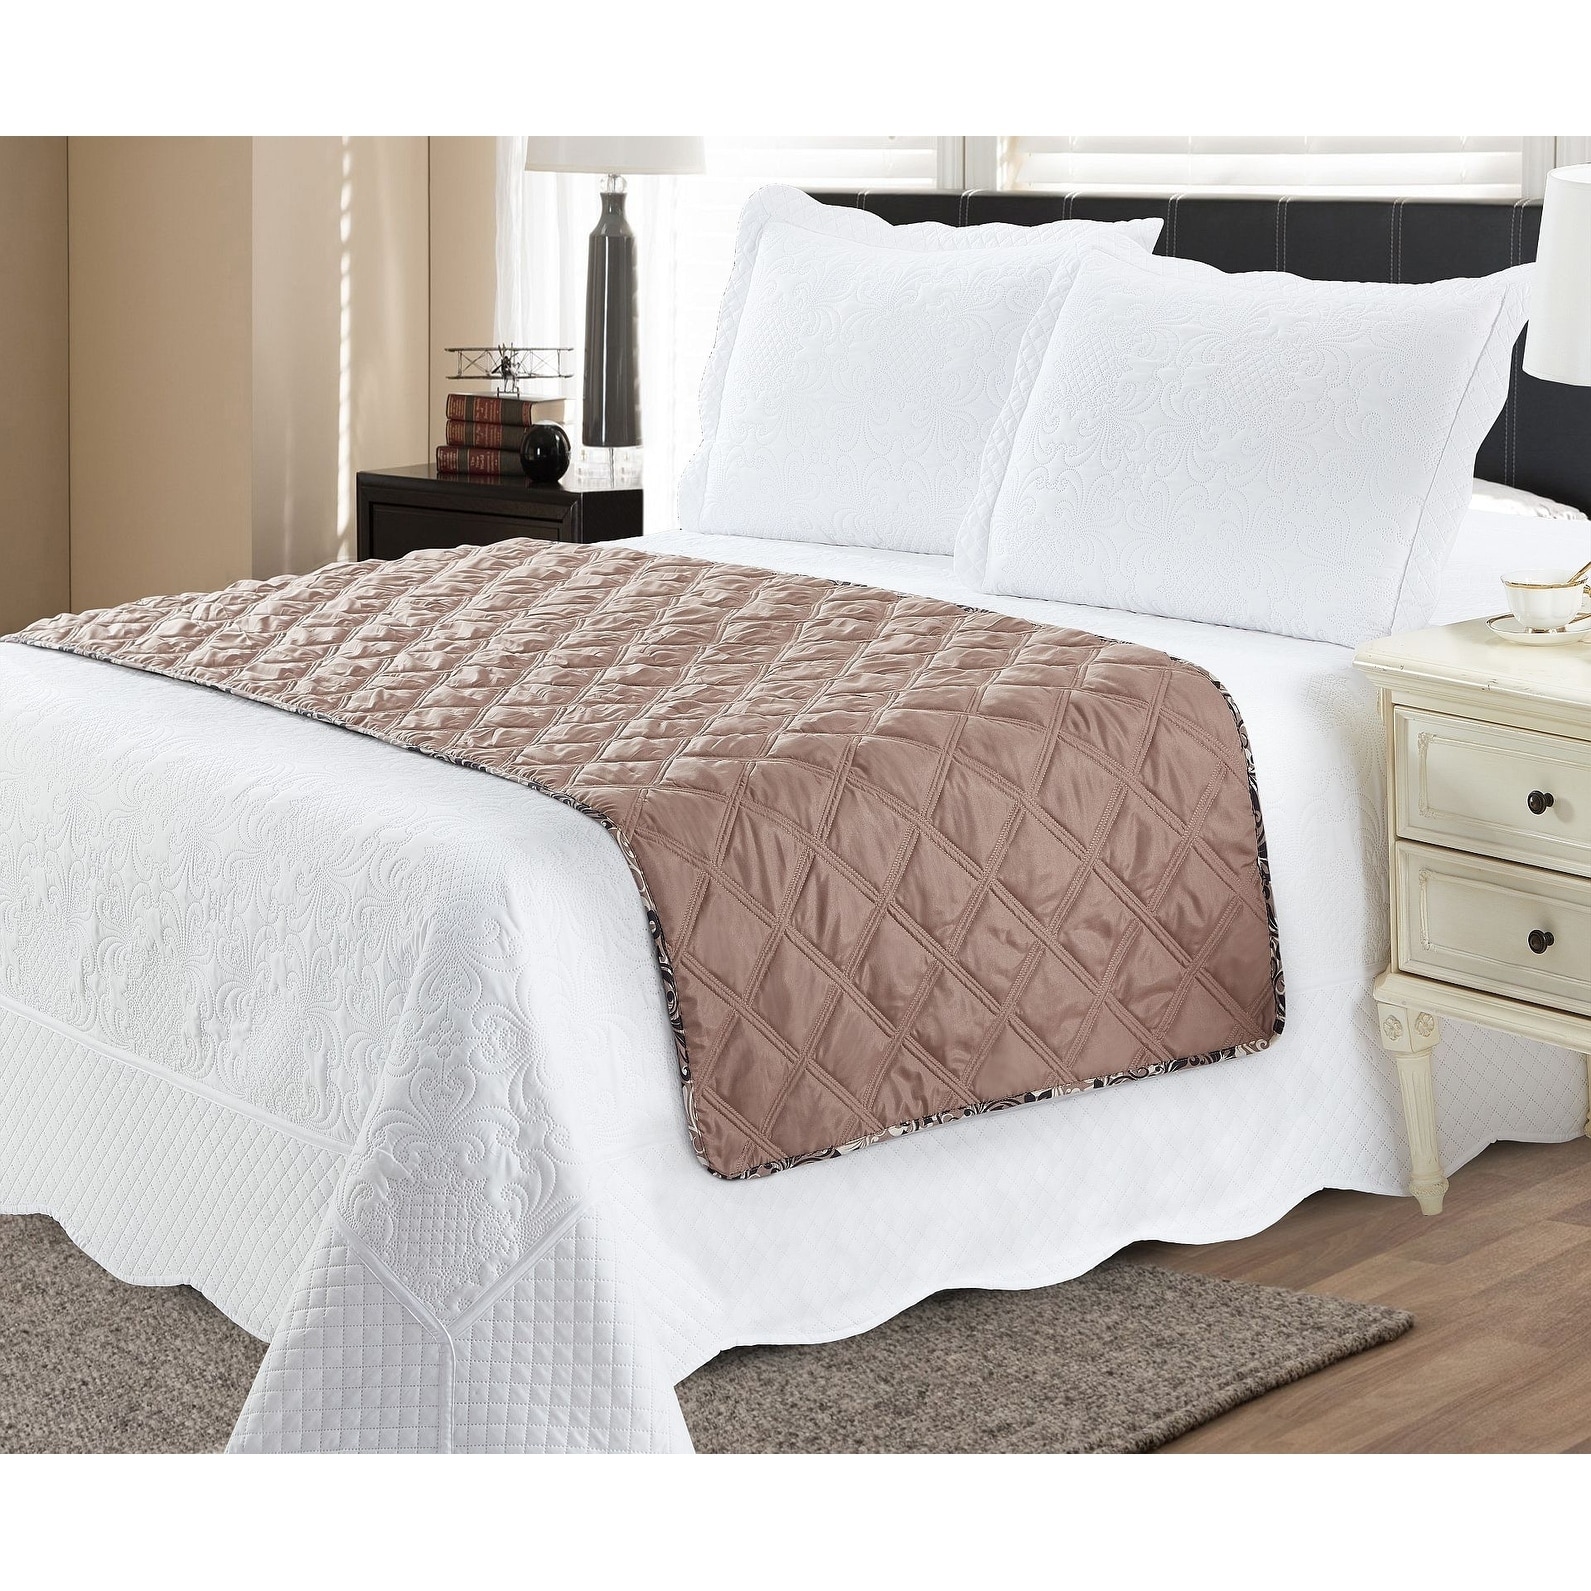 Bed Runner Protector Damask Taupe - Full / Queen